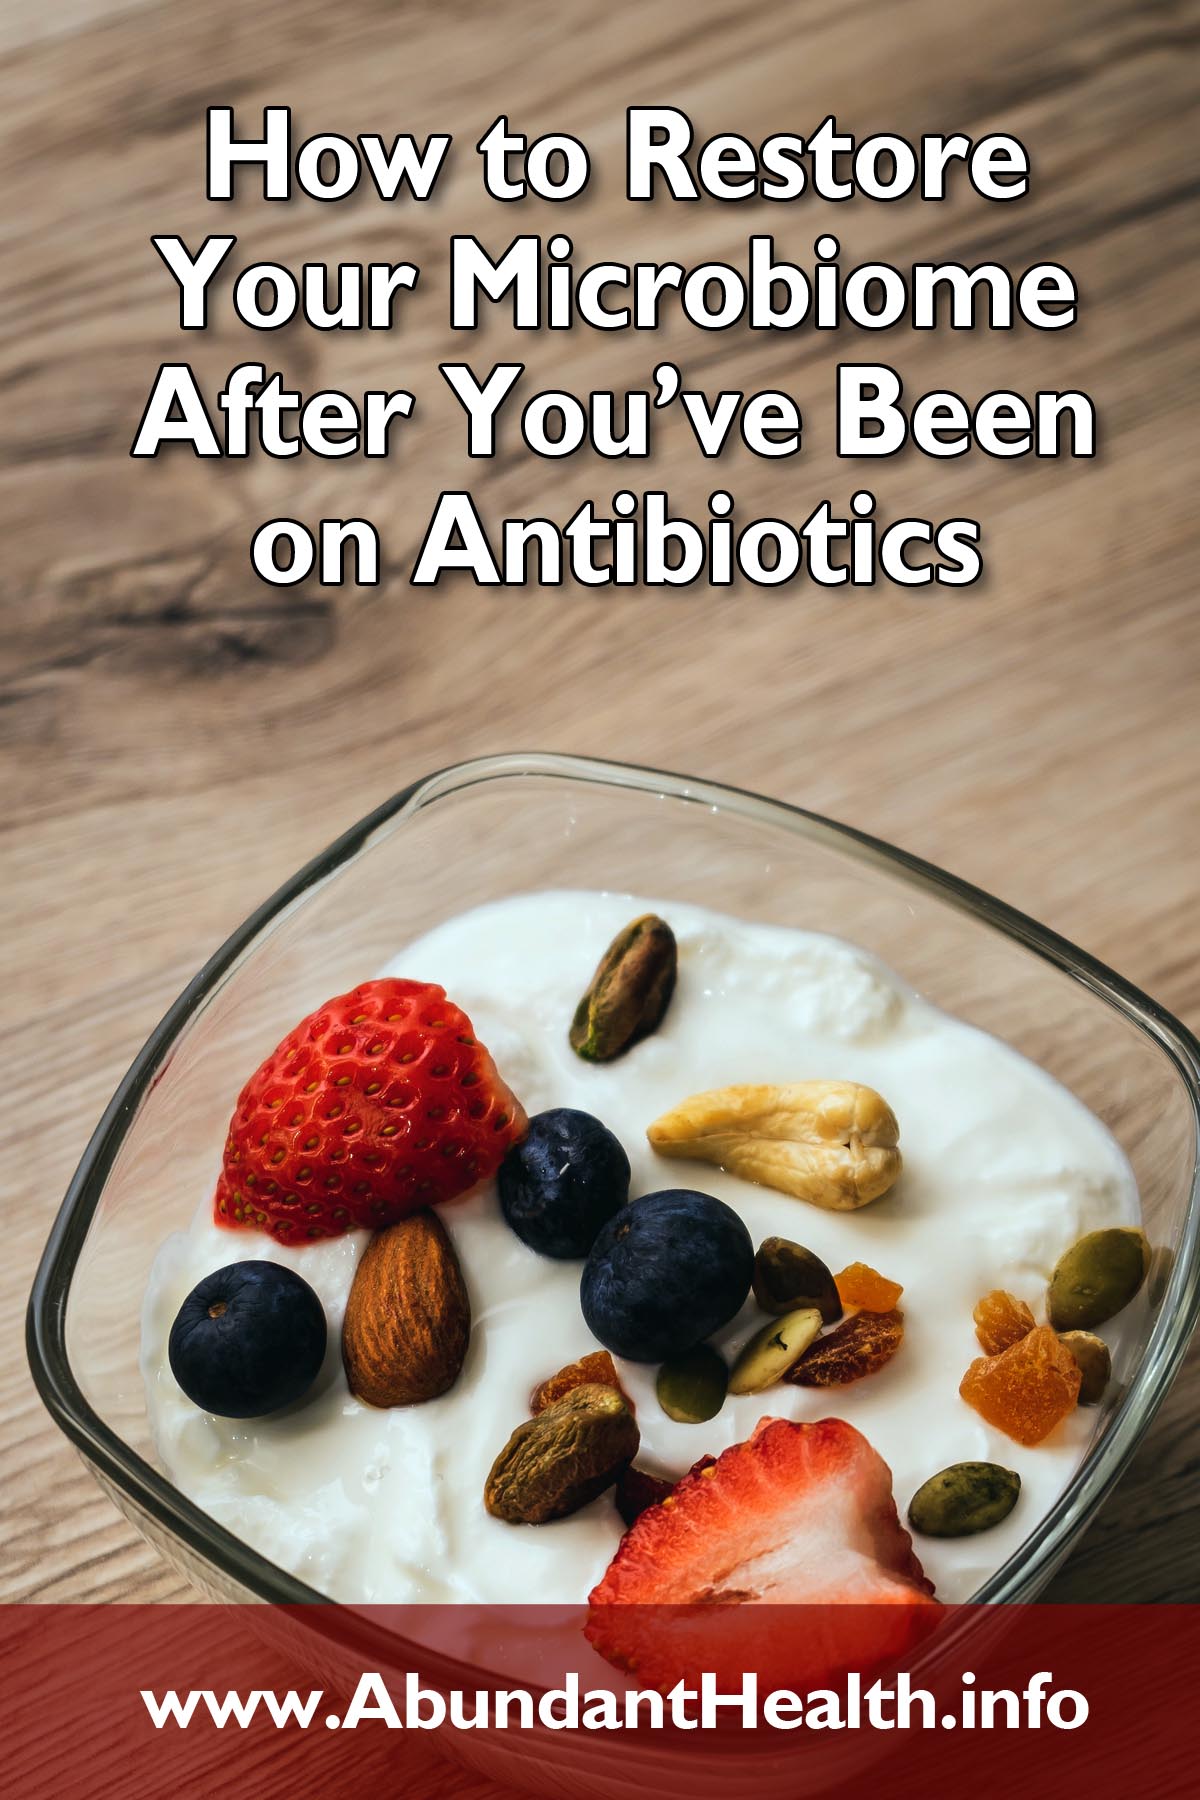 How to Use Probiotics After You’ve Been on Antibiotics